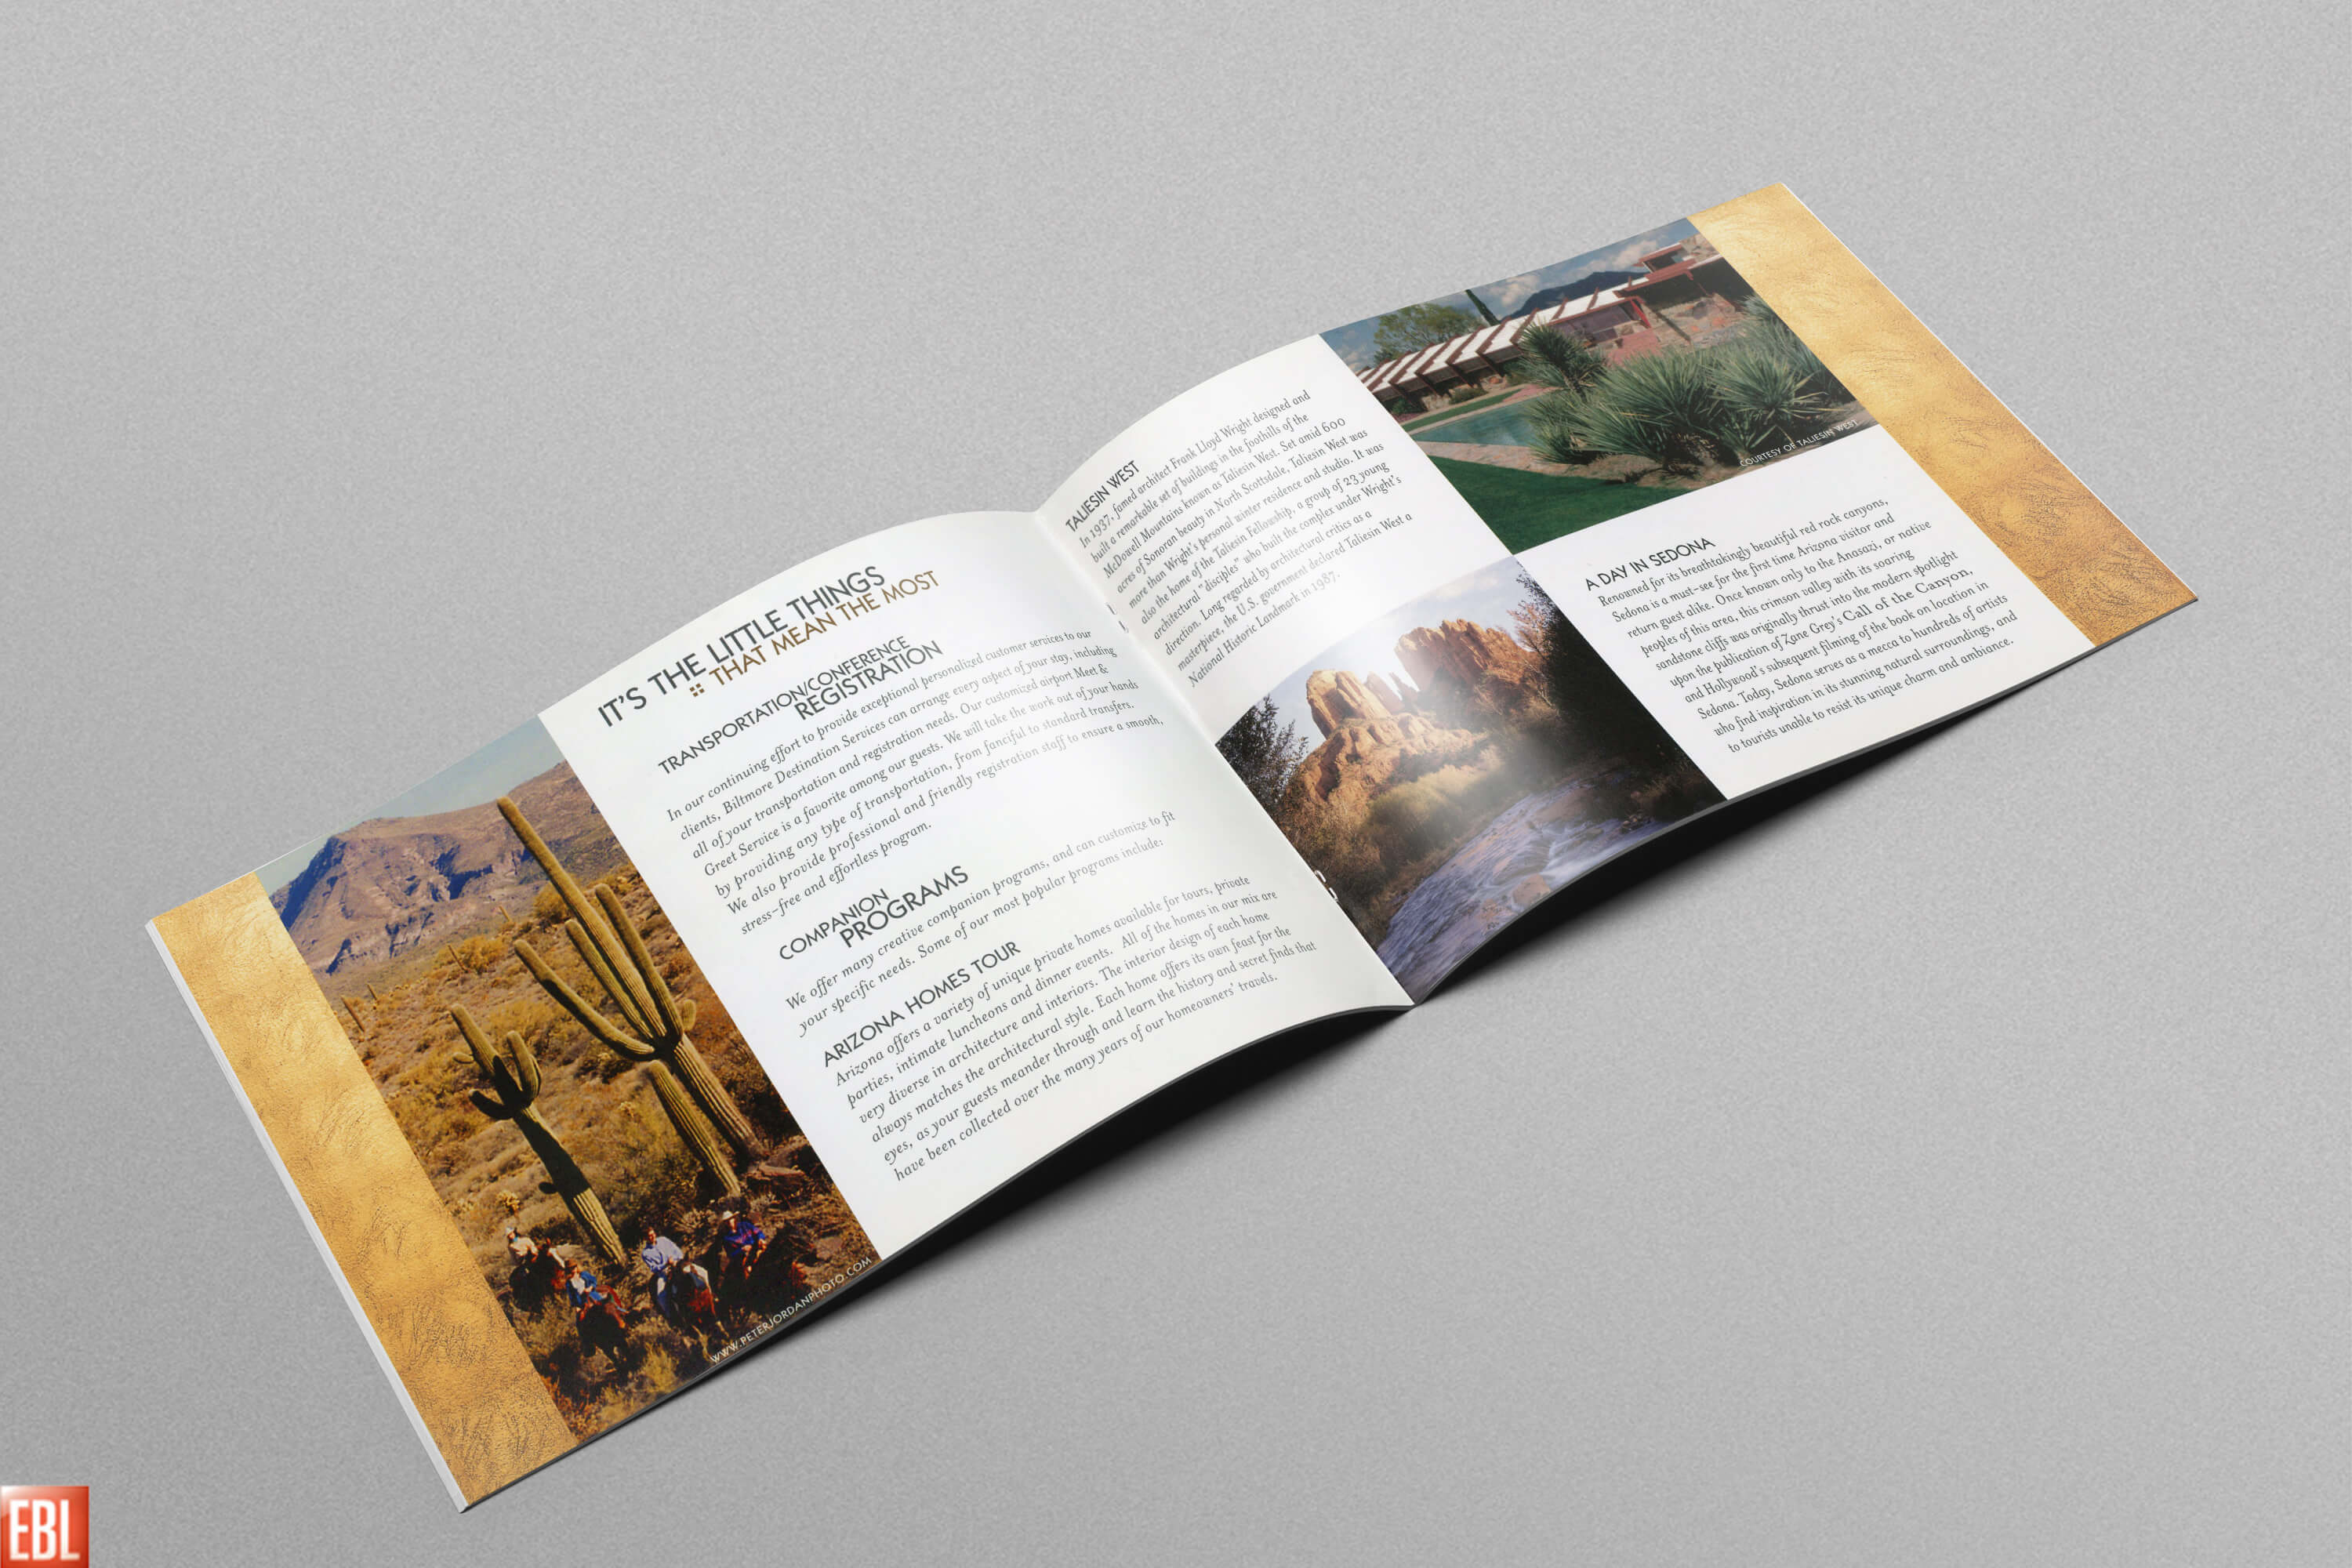 Brochure created for the Arizona Biltmore - pages 3-4